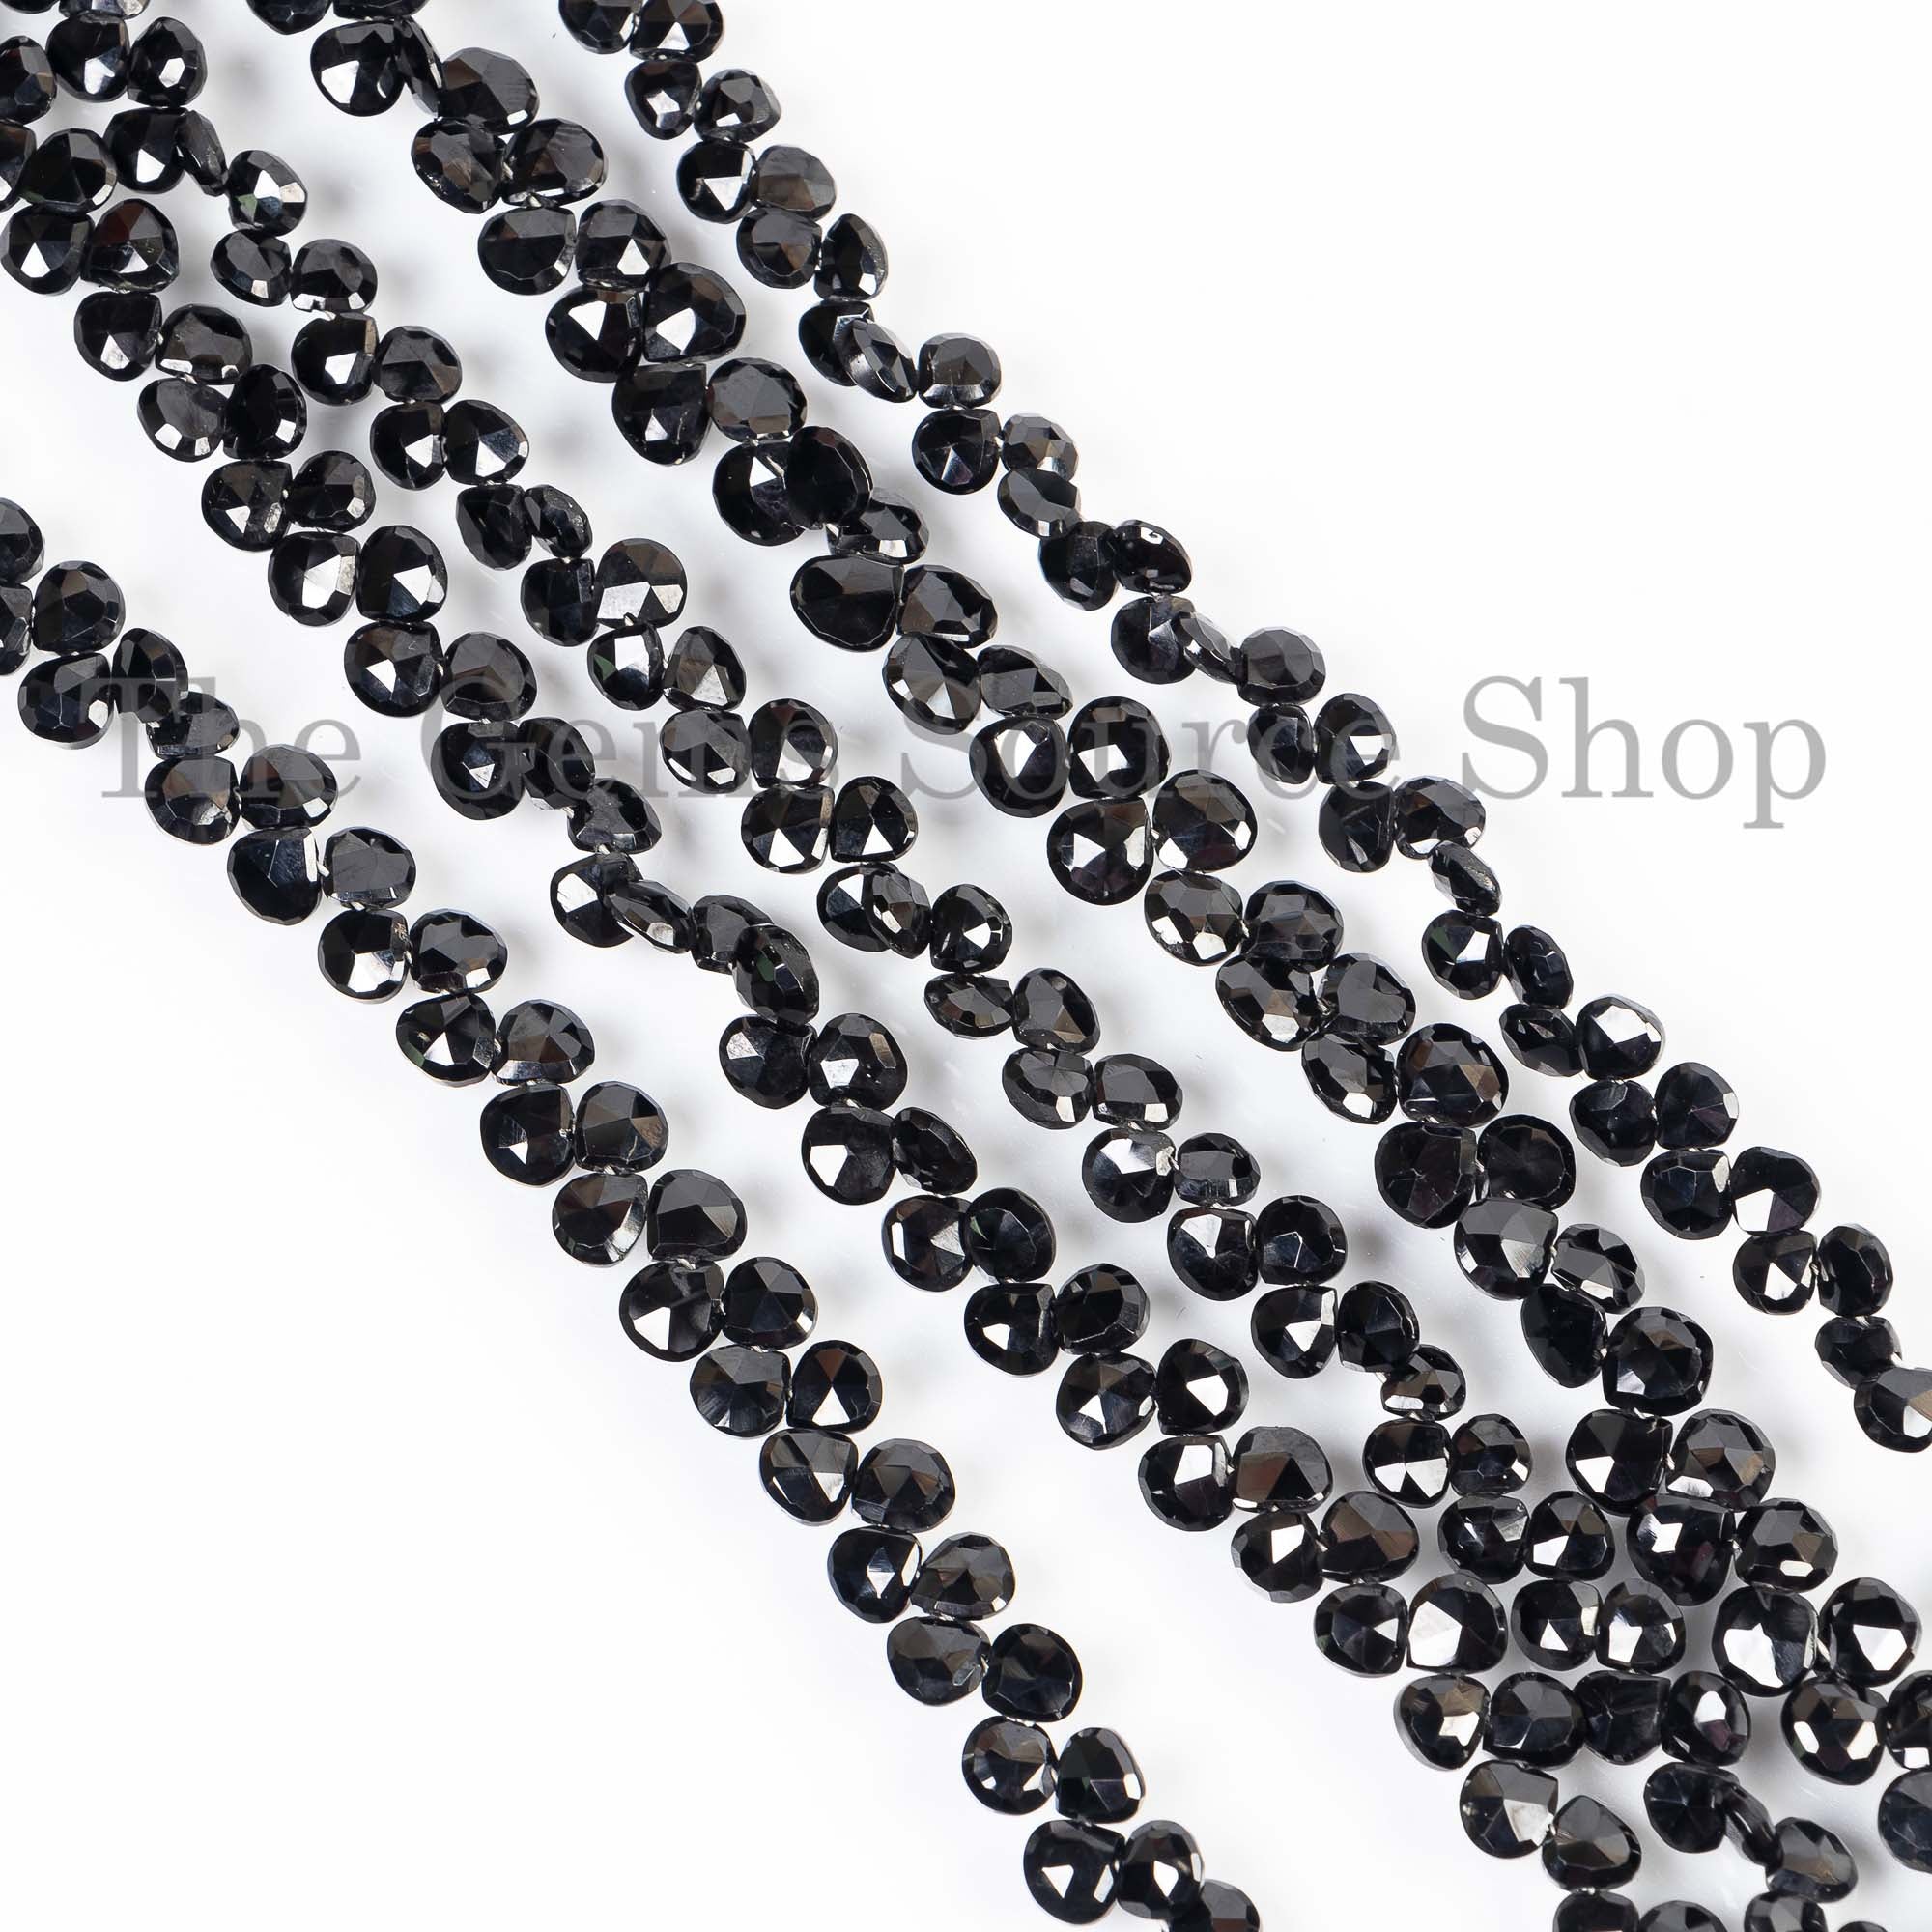 Black Spinel Faceted Heart Beads, 5-5.5mm Black Spinel Beads, Black Spinel Faceted Beads, Black Spinel Heart Beads, Beads For Jewelry